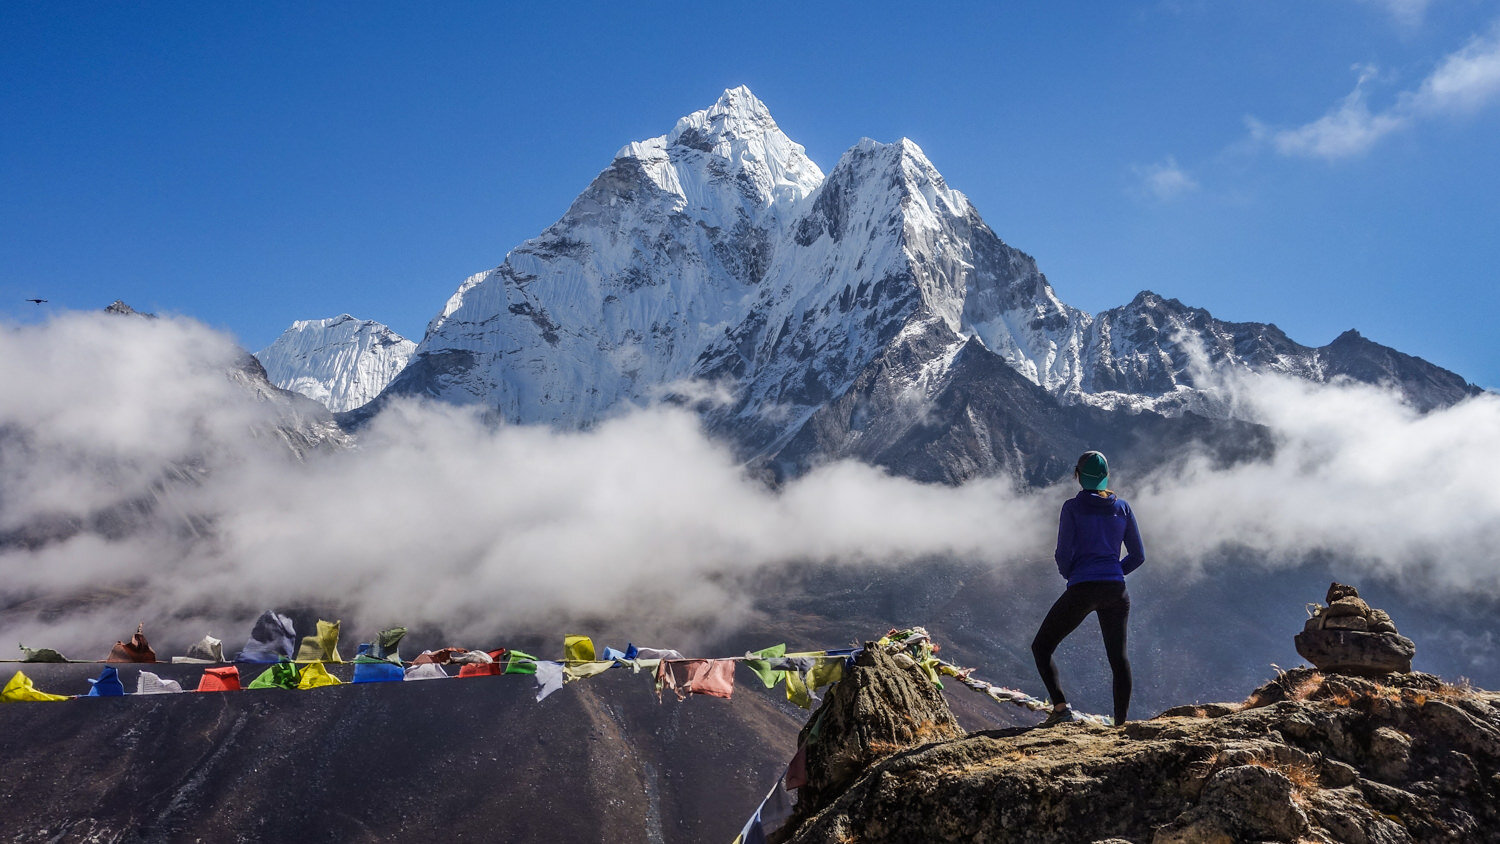 It’s wise to take training seriously before Backpacking high altitude routes like this one in nepal